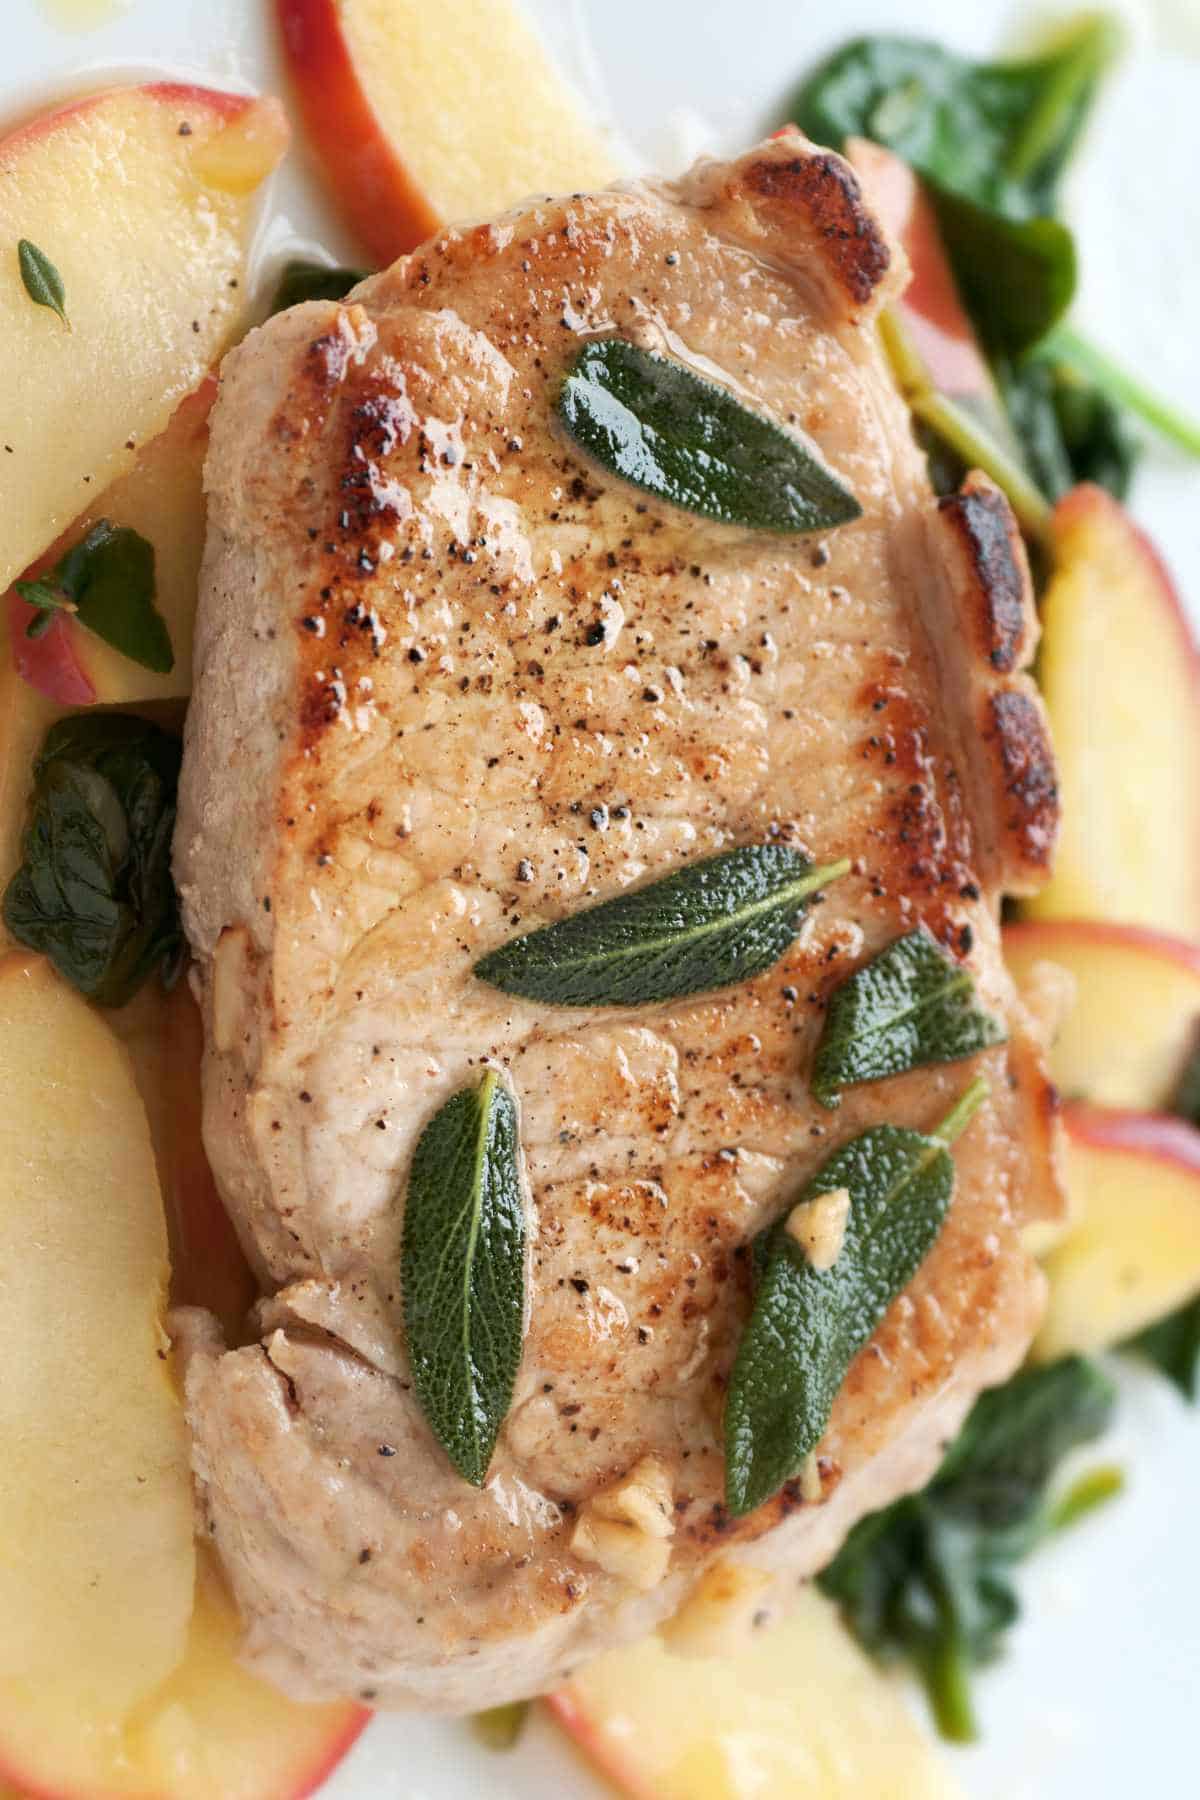 Golden pork chop with warm apple and green salad.